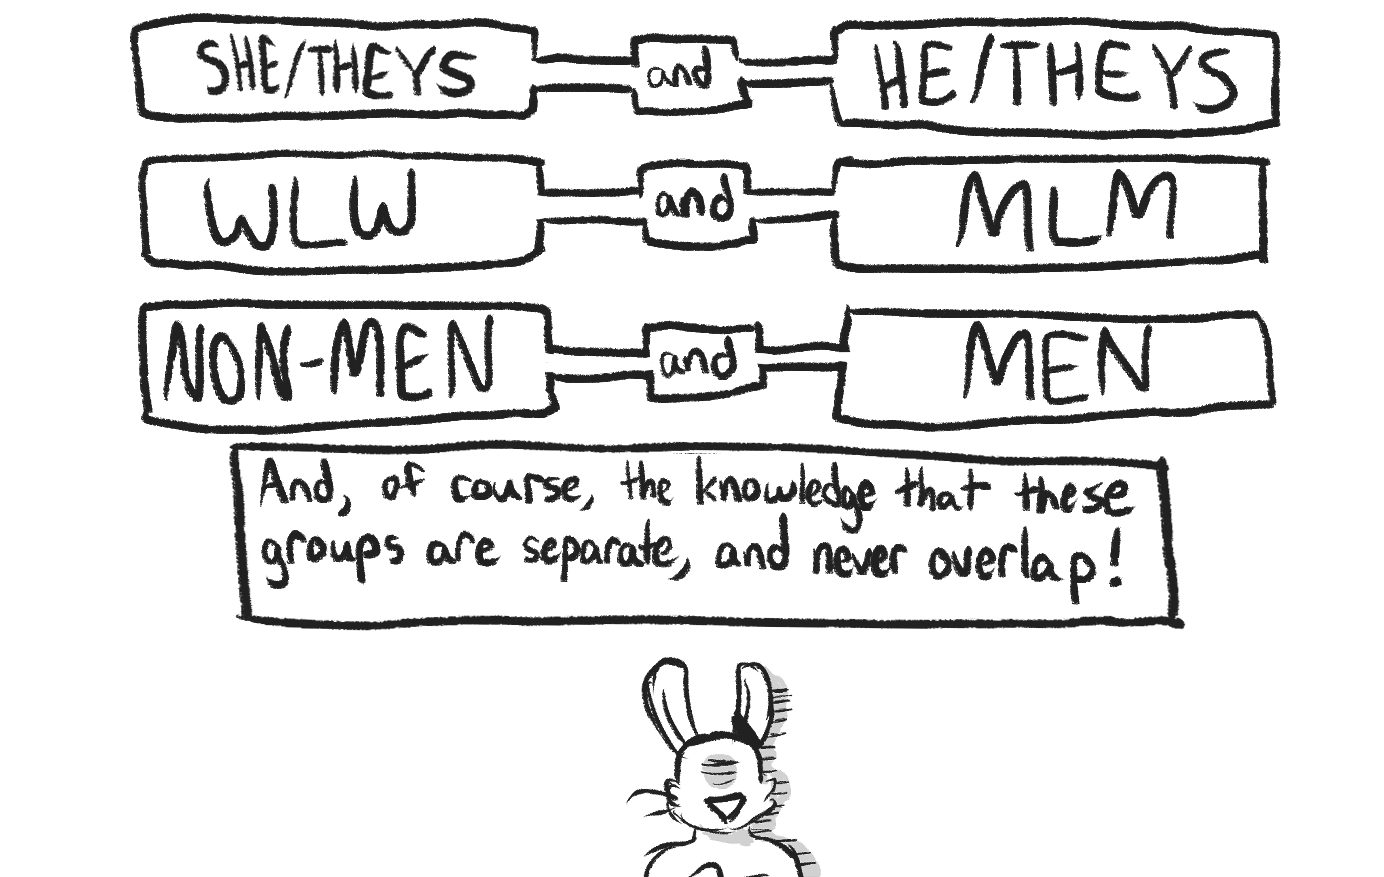 Speech bubbles of the rabbit show a number of binaries, where each part of a binary is in a seperate speech bubble. It says, 'She/theys and he/theys! WLW and MLM! Non-men and men!' And then, all in one speech bubble, at the bottom, 'And, of course, the knowledge that these groups are seperate, and never interact!' The fat bunny is very small at the bottom of the page, with a too-wide, frozen smile as she looks on in horror.